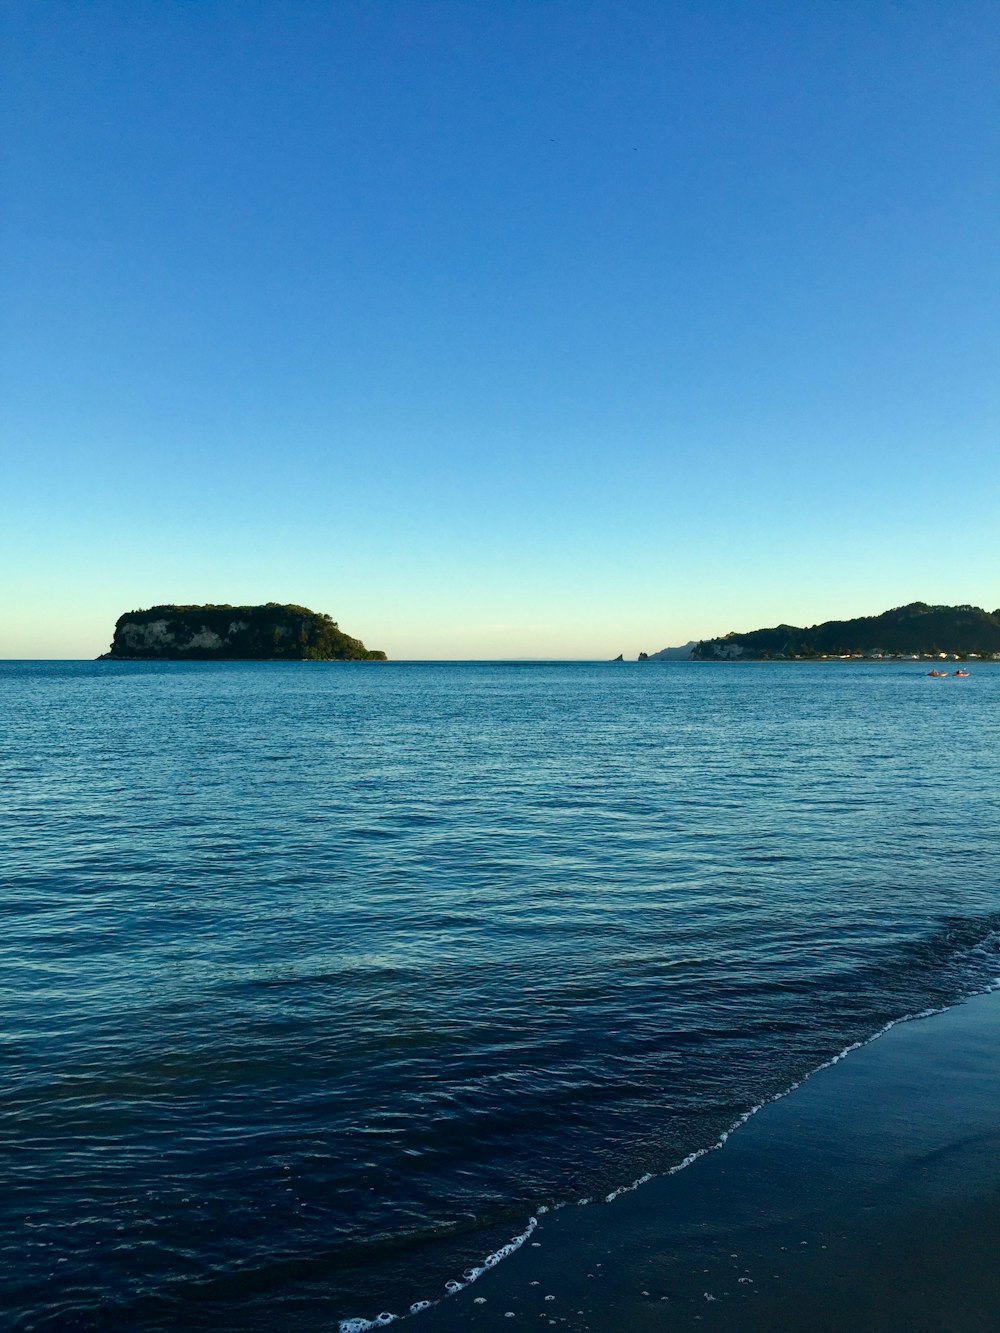 islets under clear blue sky during daytime